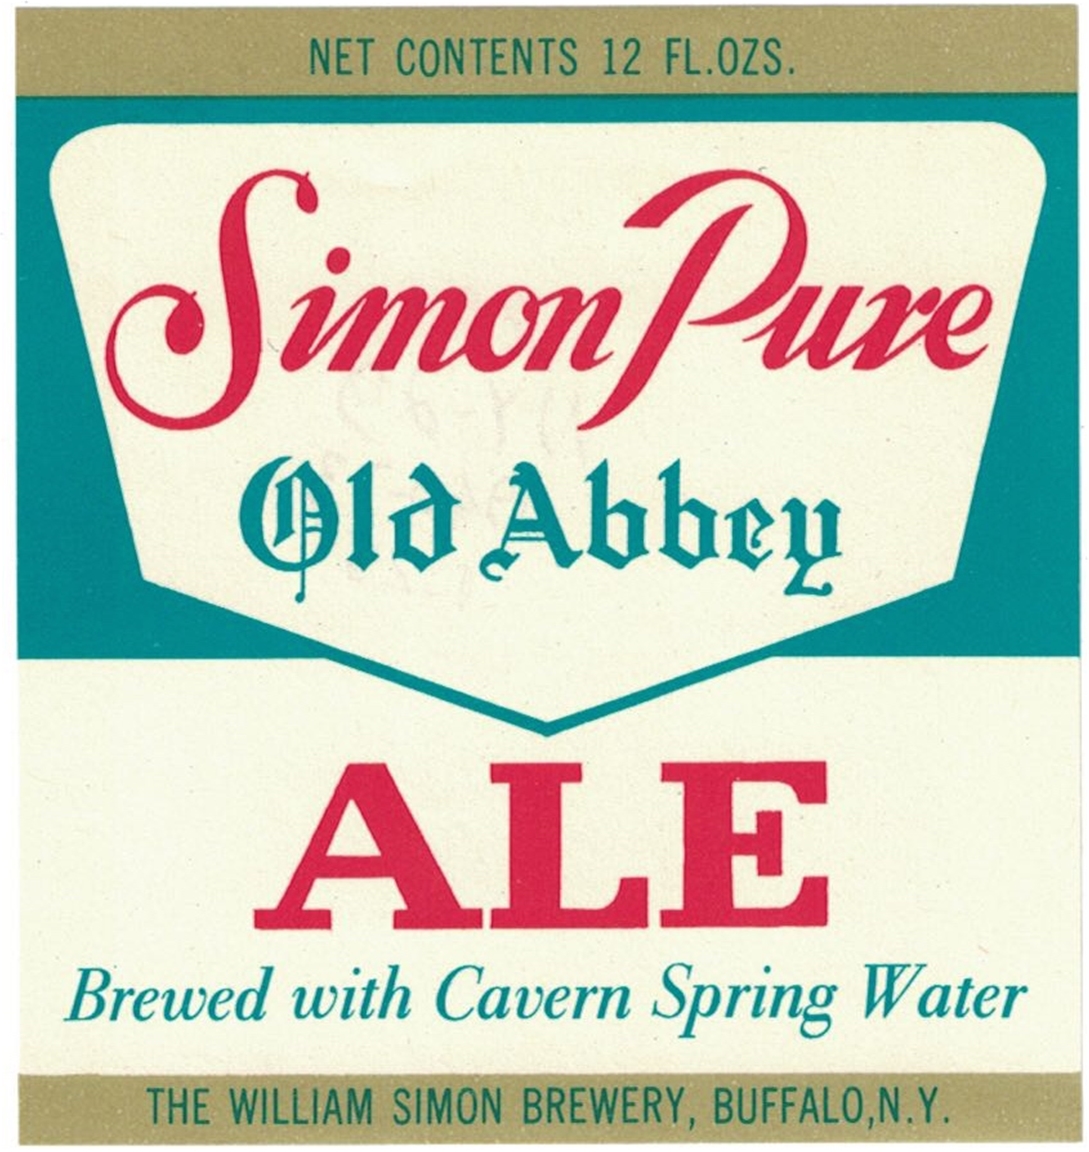 Simon Pure Old Abbey Ale Beer Label